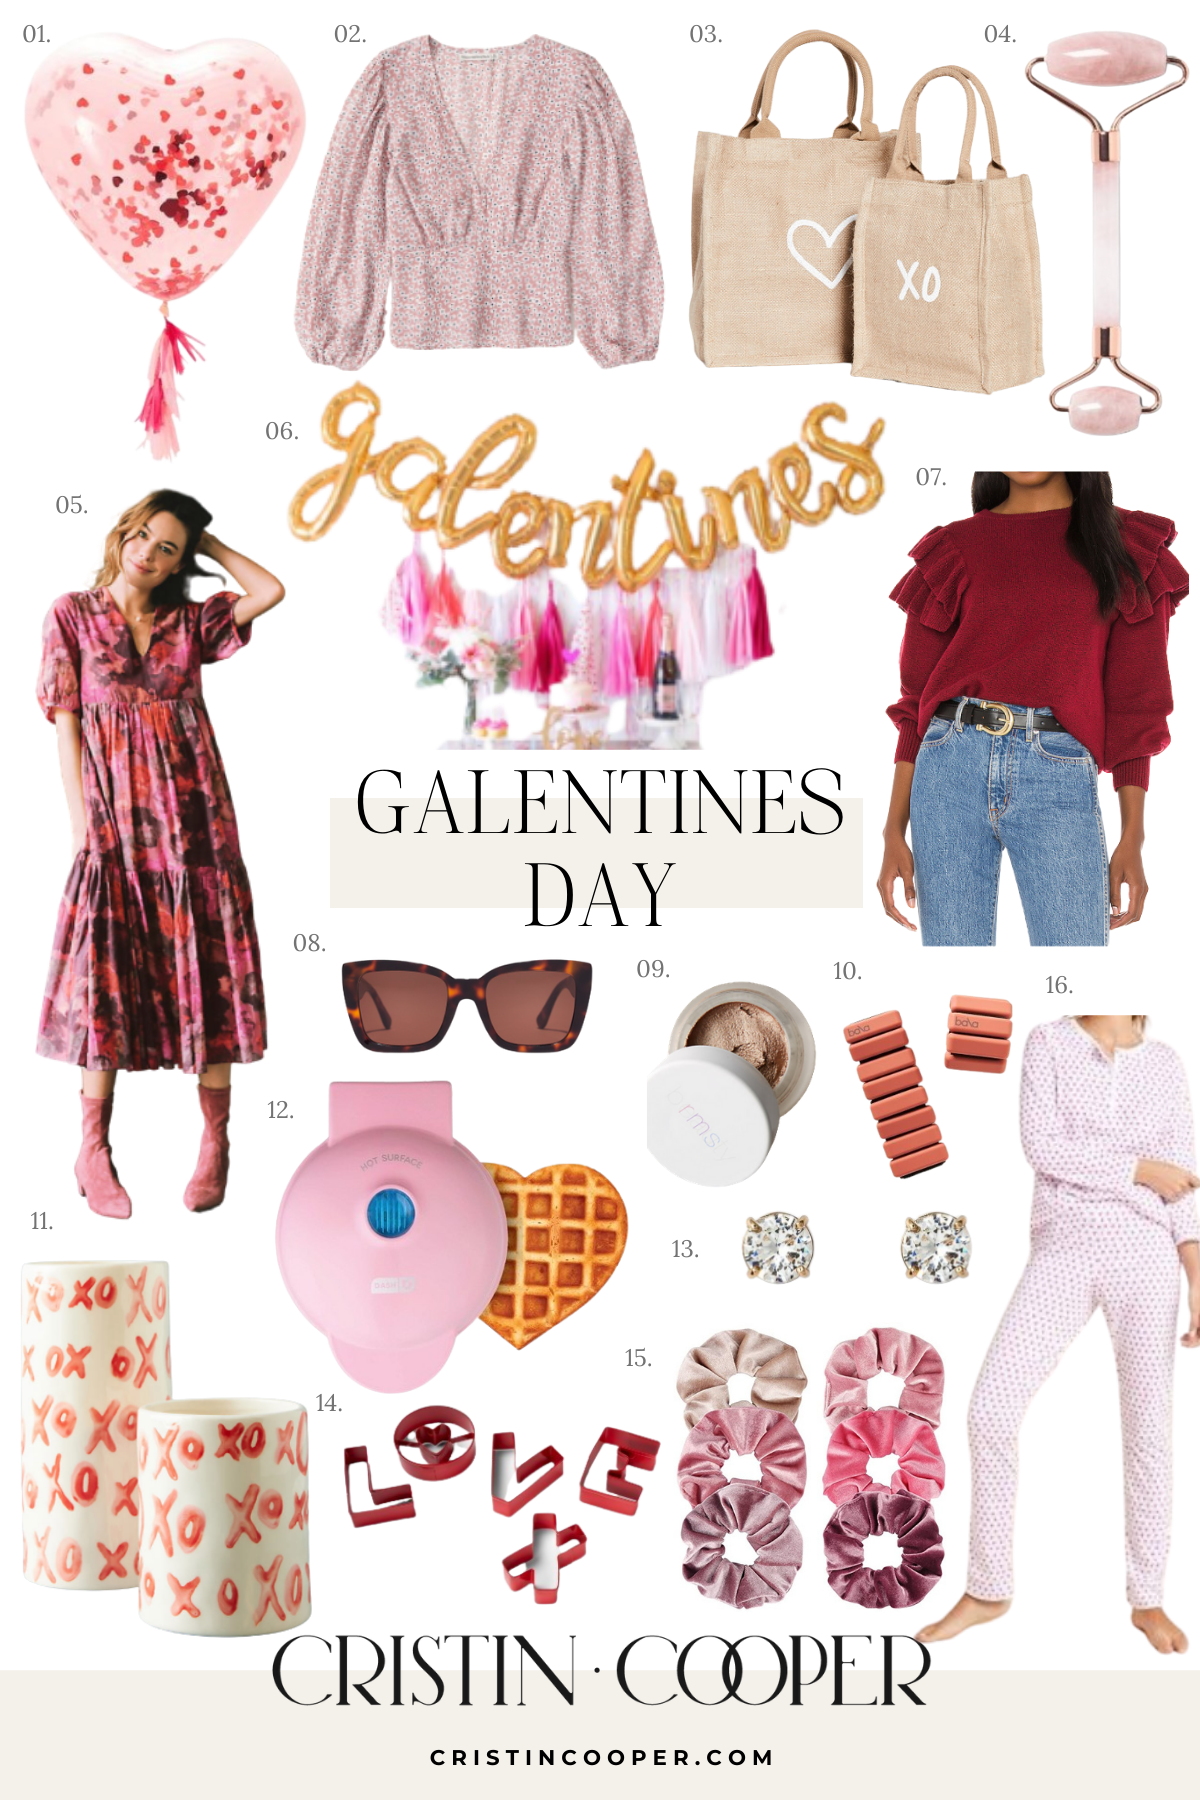 Galentines Day party ideas from lifestyle blogger Cristin Cooper. 